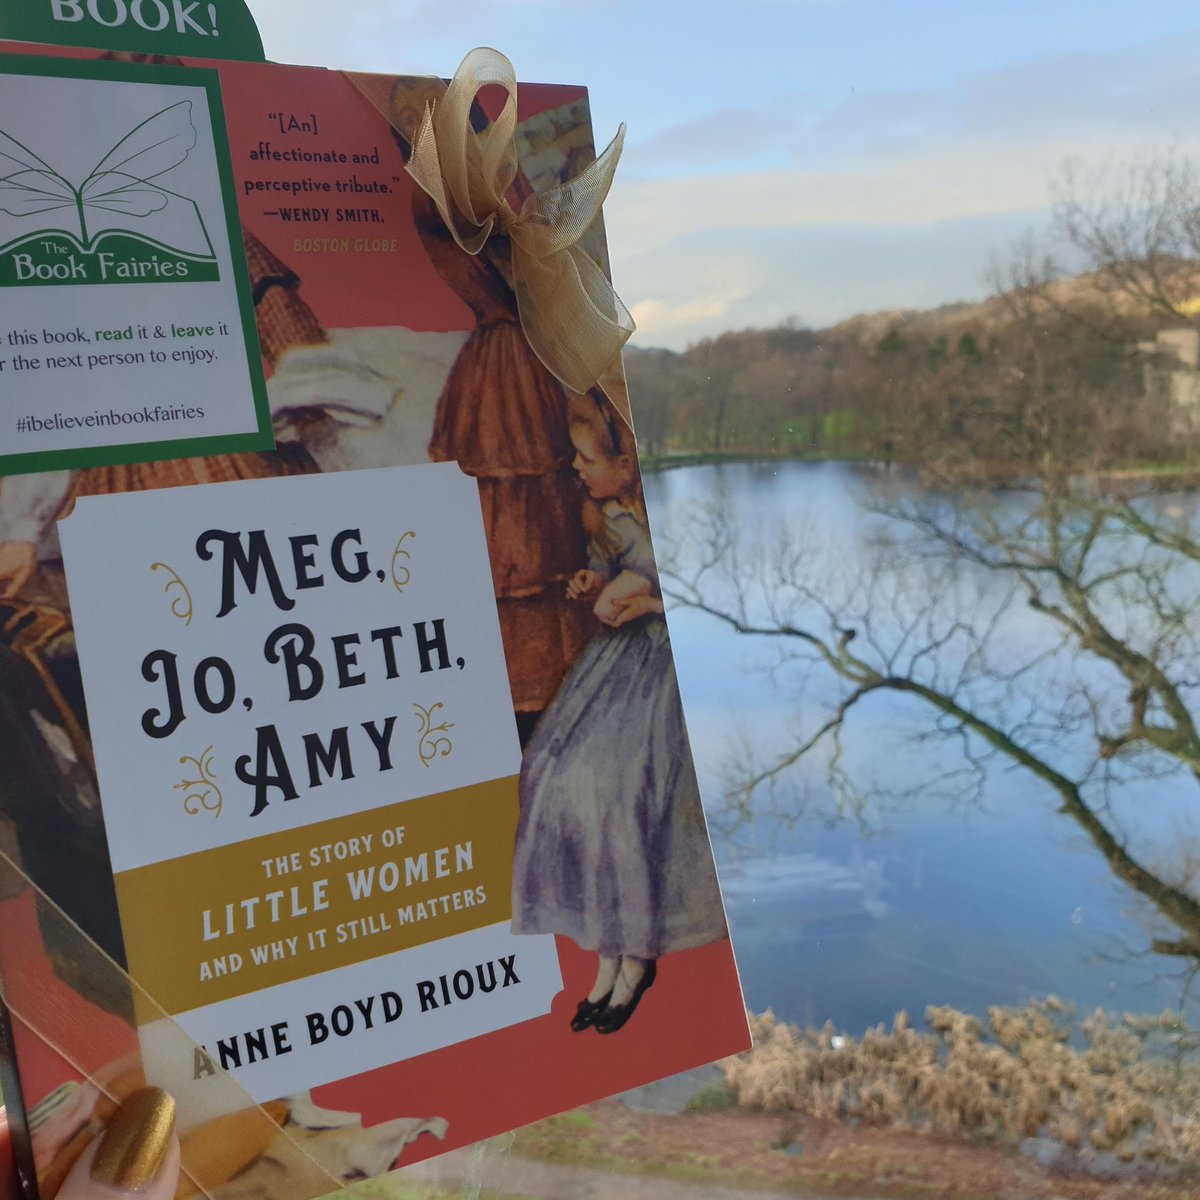 We've left a copy of @AnneBoydRioux's Meg, Jo, Beth and Amy, published @wwnortonUK in the Library @isstirling @universityofstirling. Were you the lucky finder?#IBelieveInBookFairies #BookFairyAdvent #MegJoBethAmy #LittleWomen